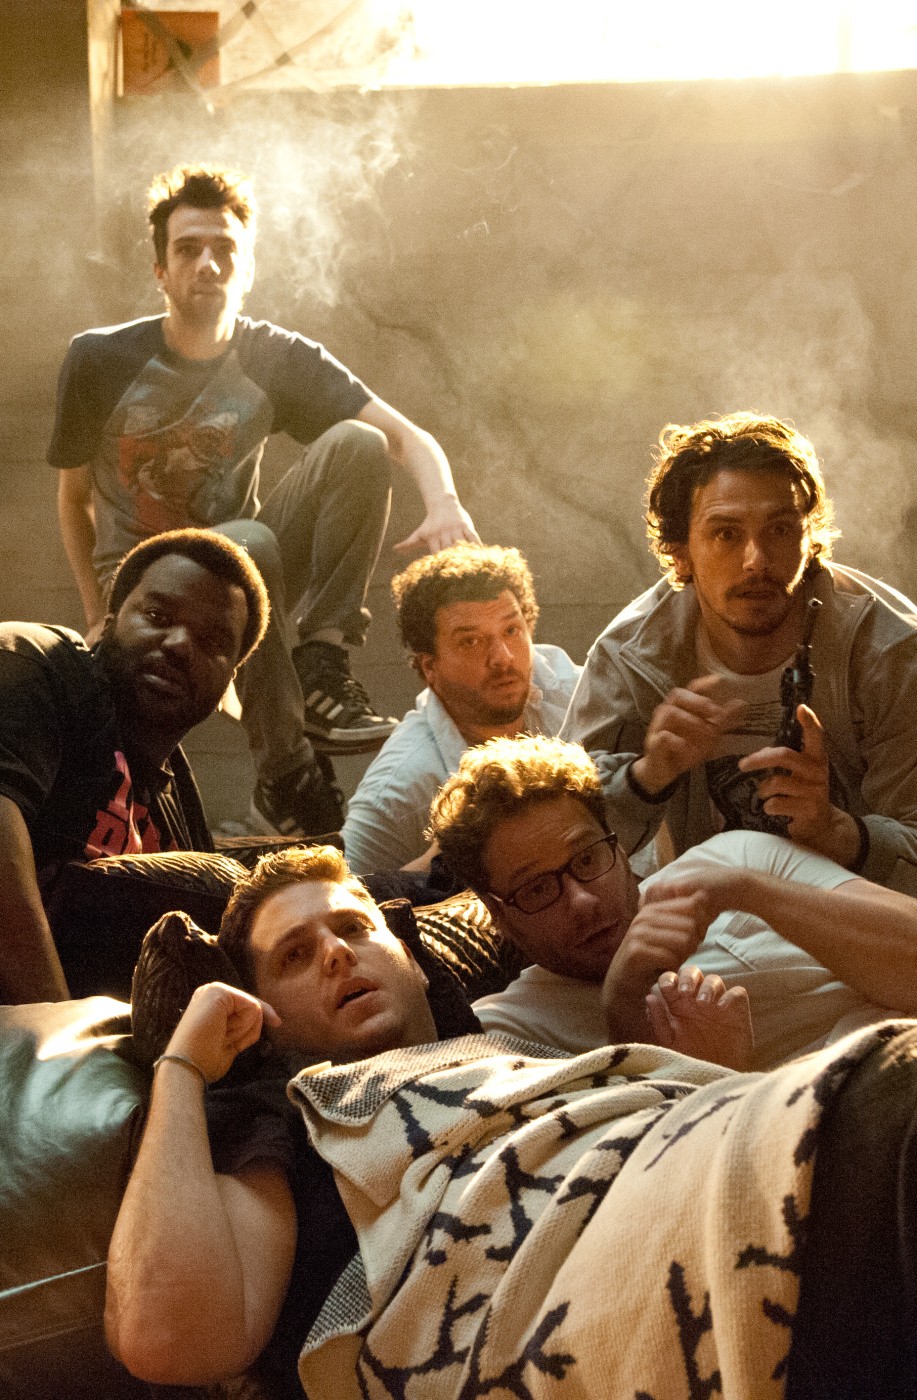 Jay Baruchel, Craig Robinson, Danny McBride, James Franco, Jonah Hill and Seth Rogen in Columbia Pictures' This Is the End (2013)